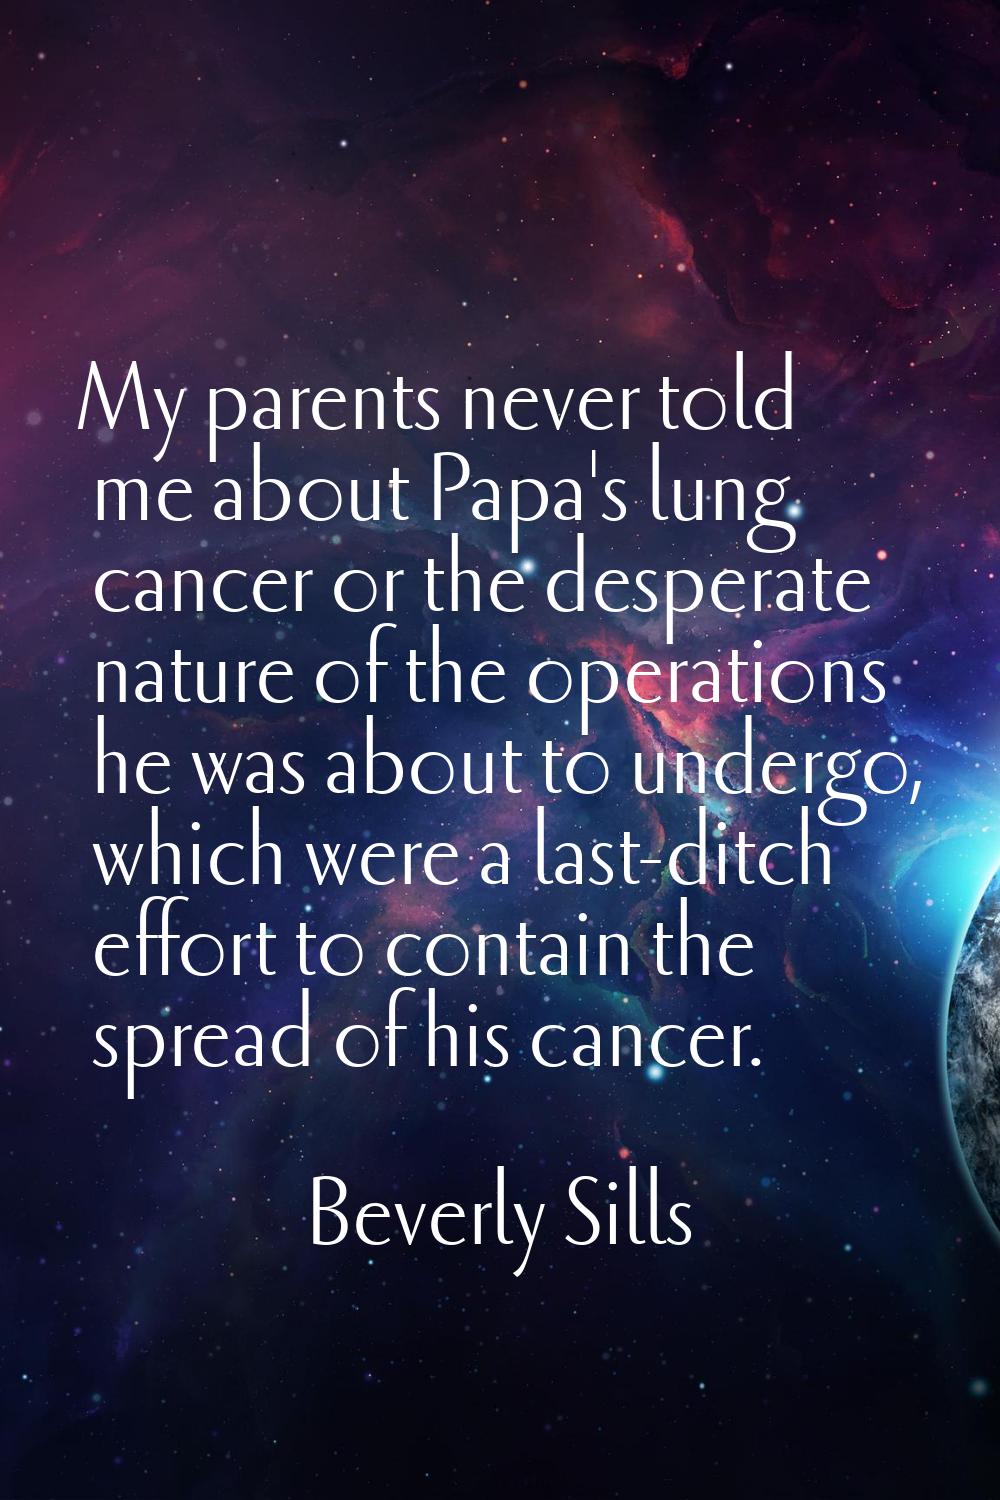 My parents never told me about Papa's lung cancer or the desperate nature of the operations he was 